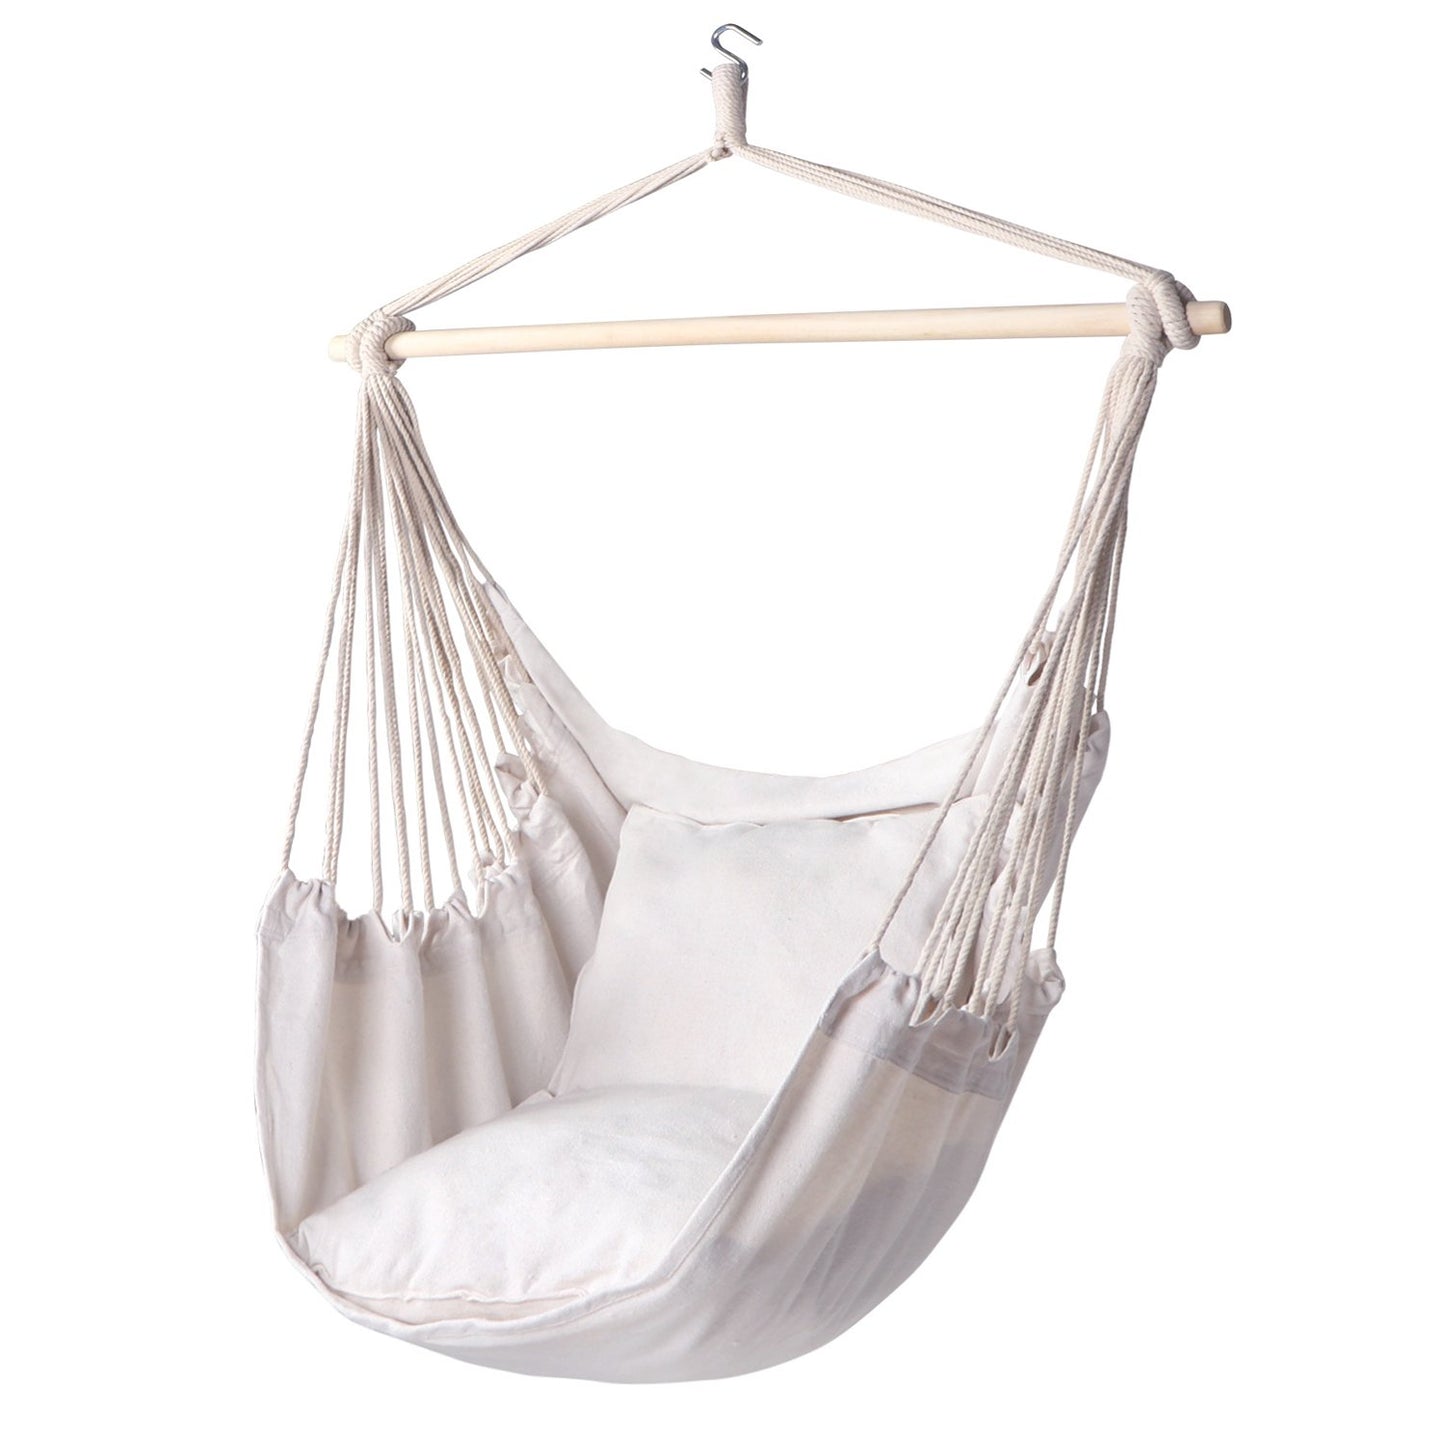 Hammock Chair Hanging Rope Swing with 2 Seat Cushions - Y- STOP